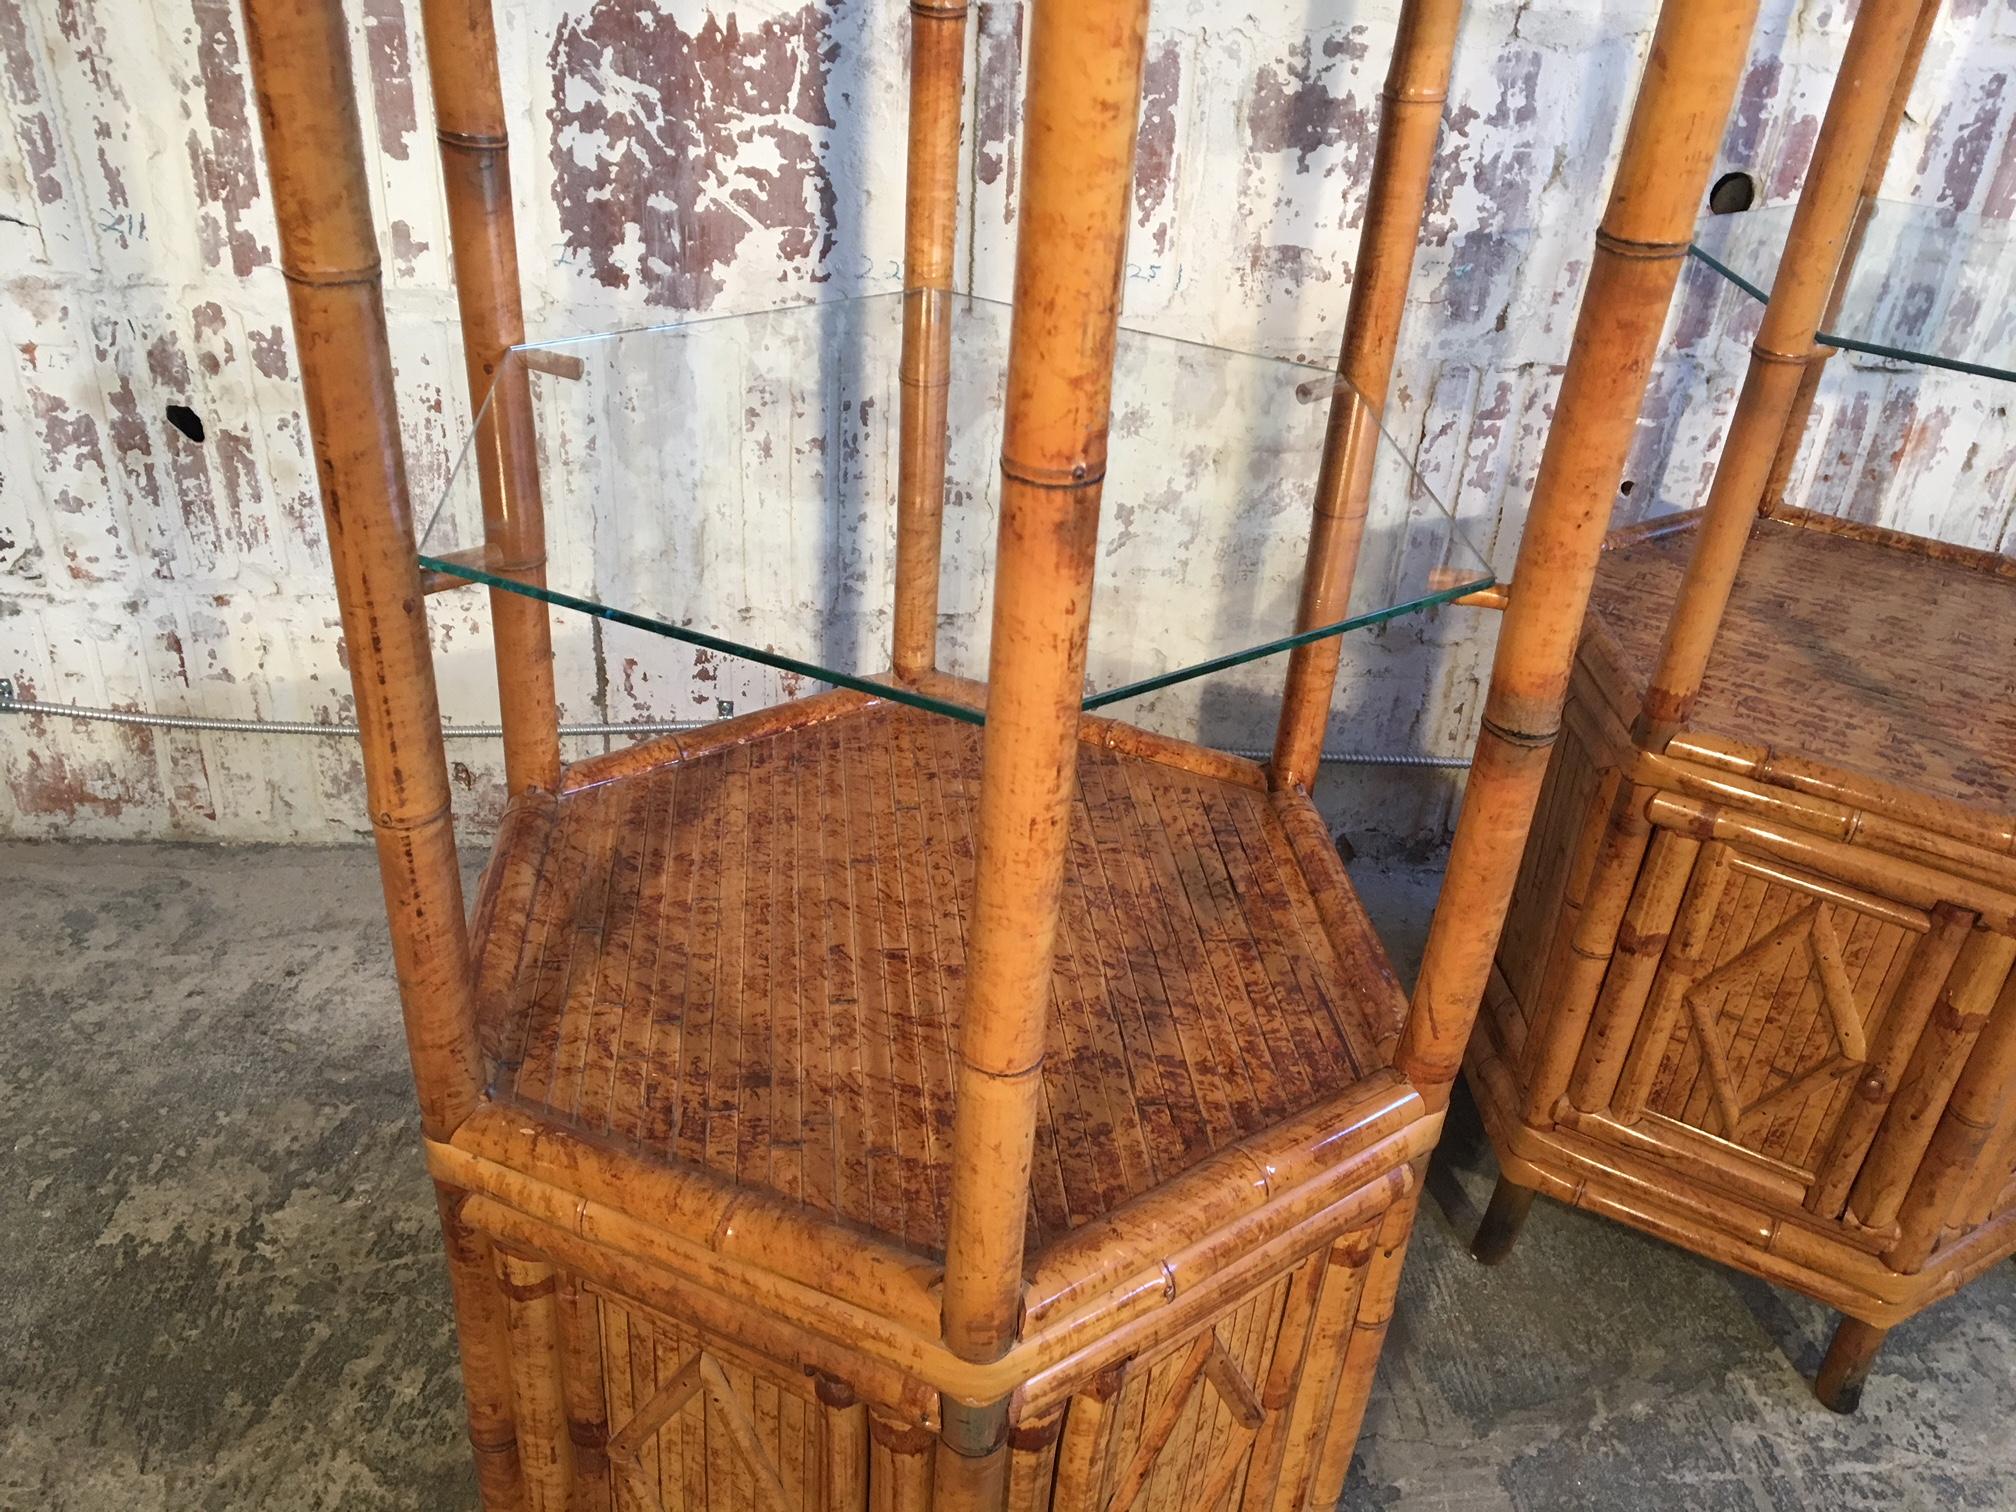 Fabulous pair of large bamboo pagoda style étagères, circa 1950s. Hexagon shape with glass shelving and storage below. Excellent condition, only very minor signs of age appropriate wear. Doors operate perfectly. Glass shelves in excellent condition.